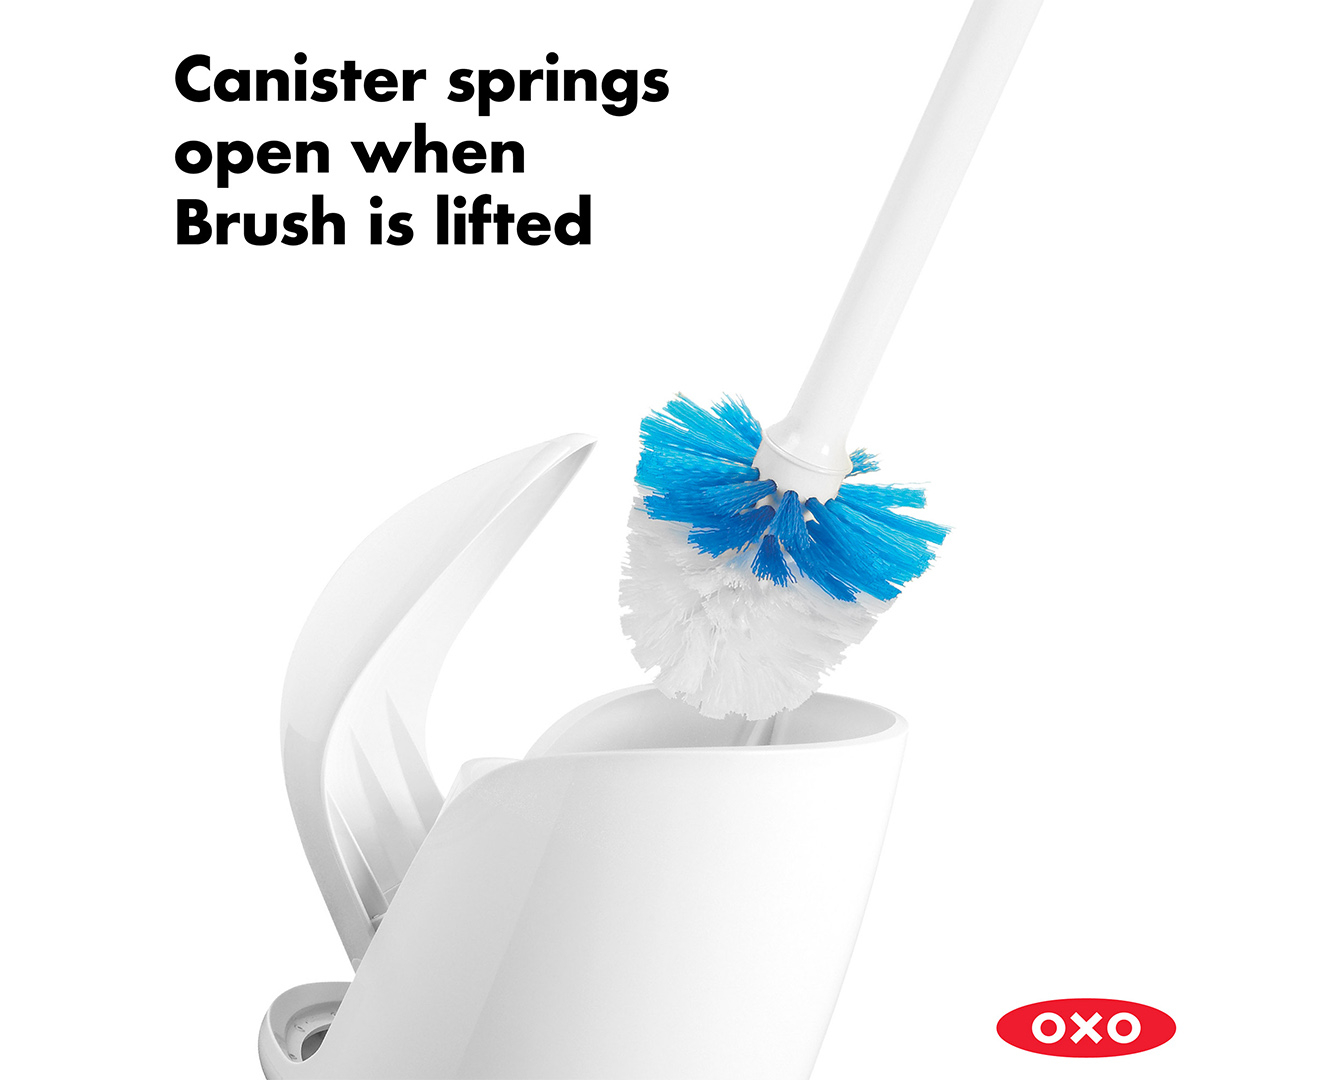 Oxo Good Grips Flex Neck Toilet Bowl Cleaning Brush Scrubber w